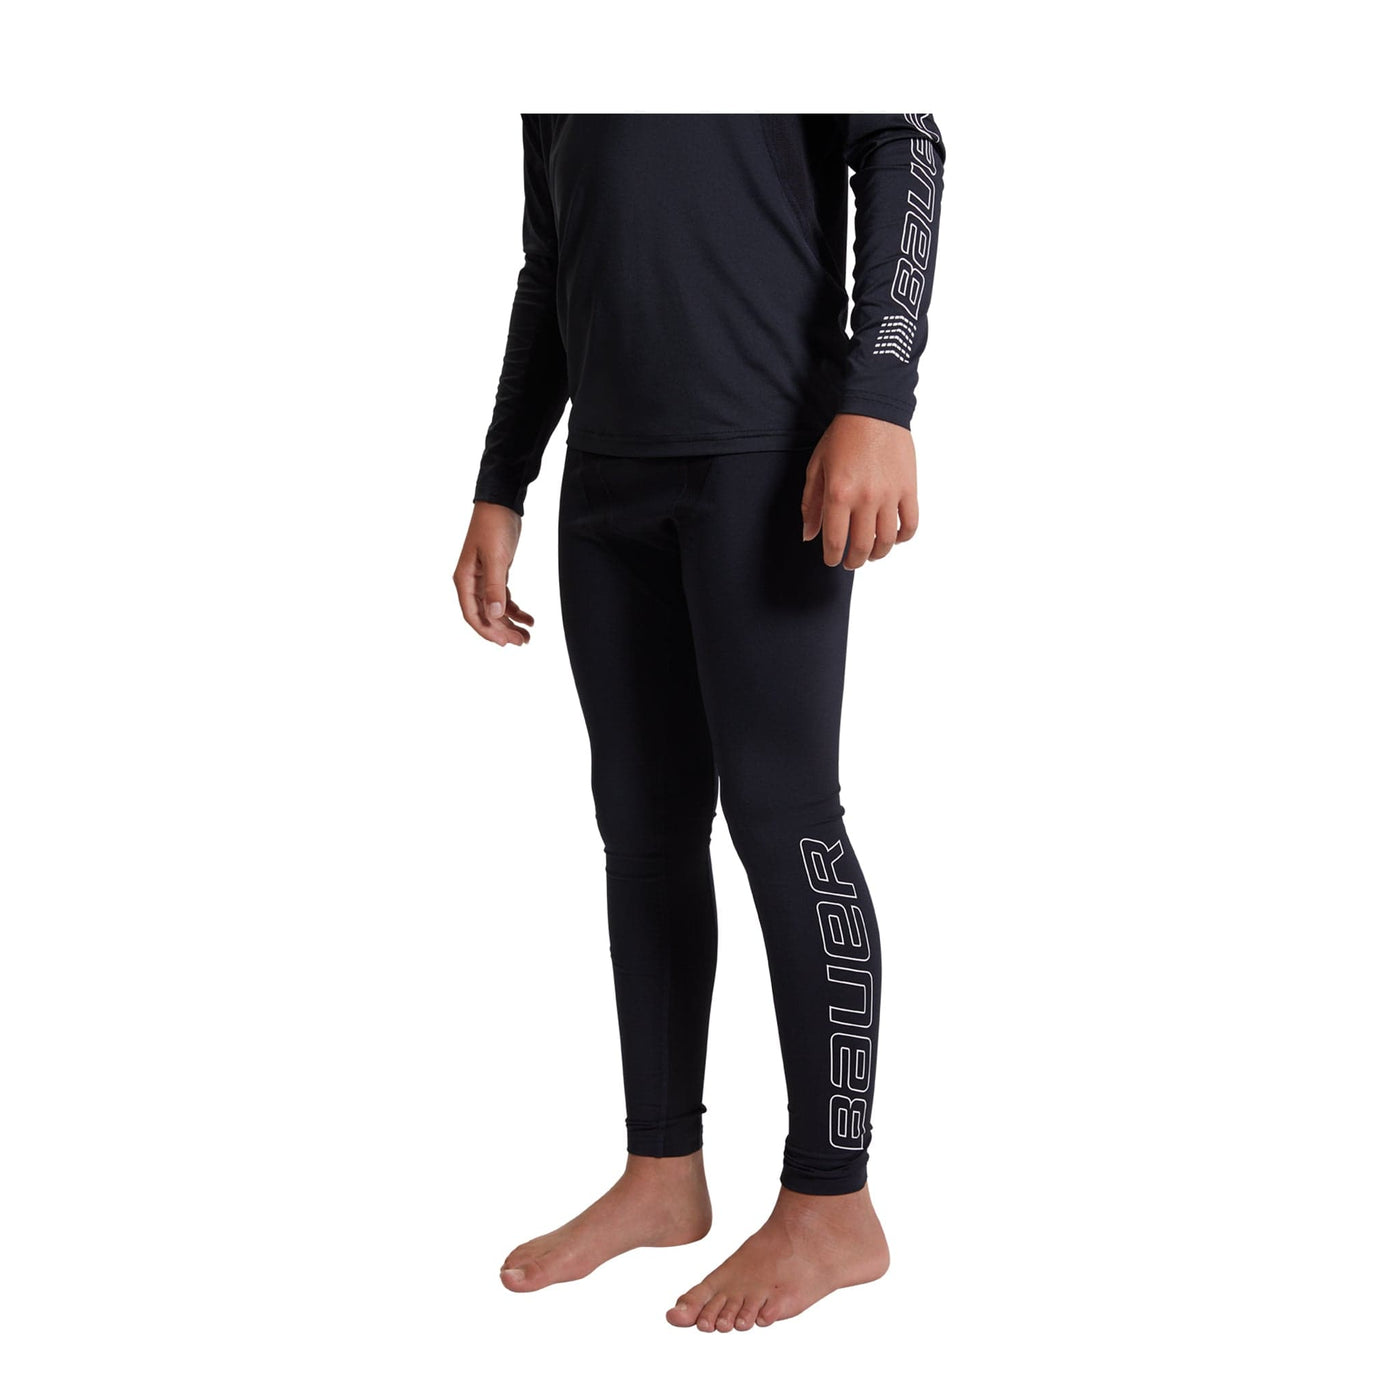 Bauer Performance Senior Baselayer Pants - The Hockey Shop Source For Sports